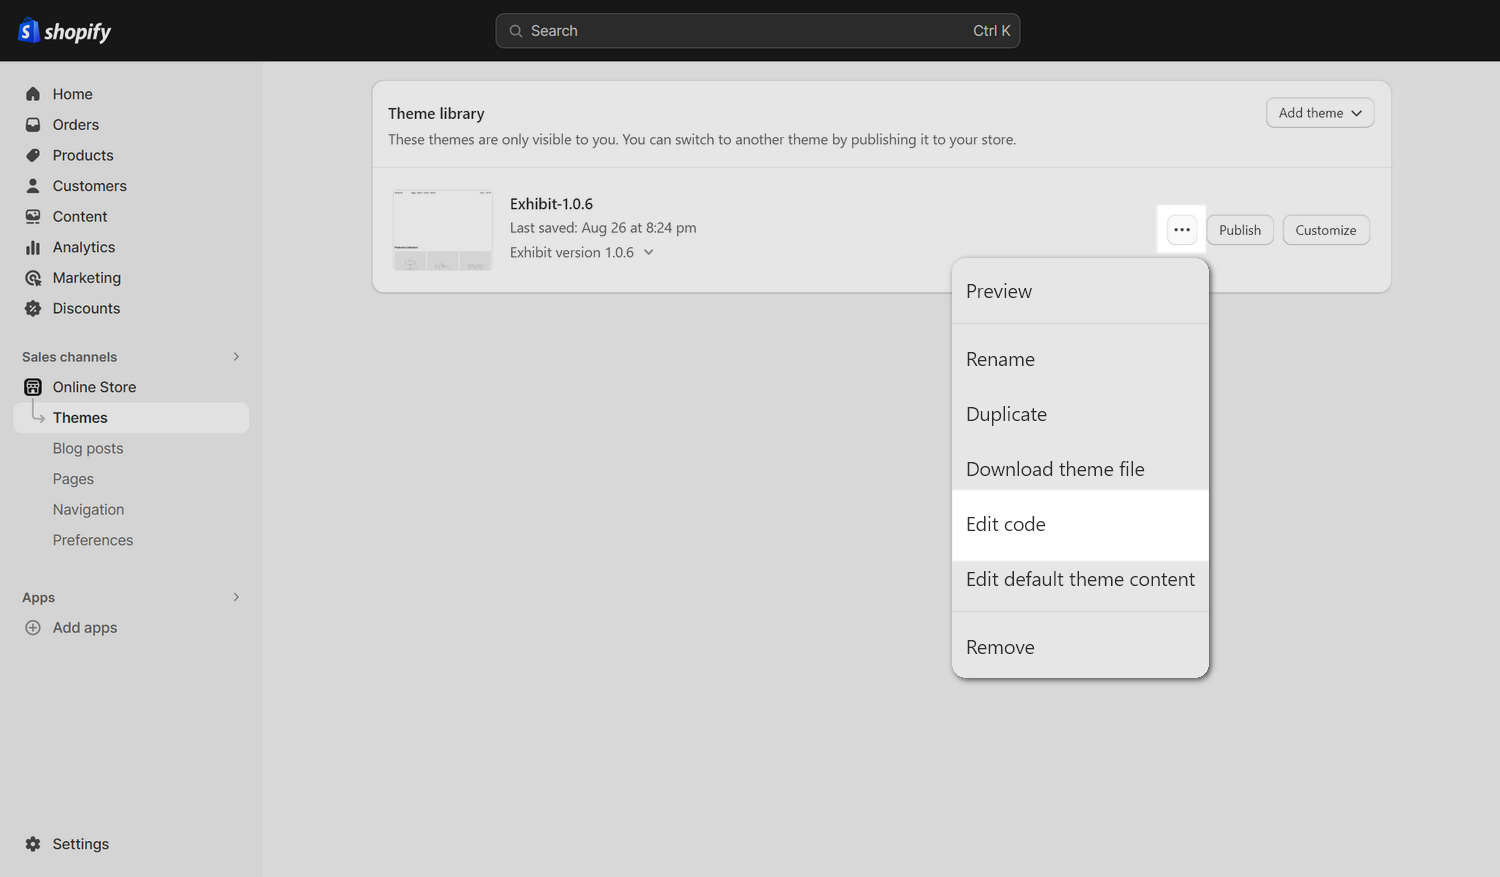 Screenshot of the Exhibit theme, in the Online Store section of the Shopify Admin, with the Actions dropdown menu expanded.